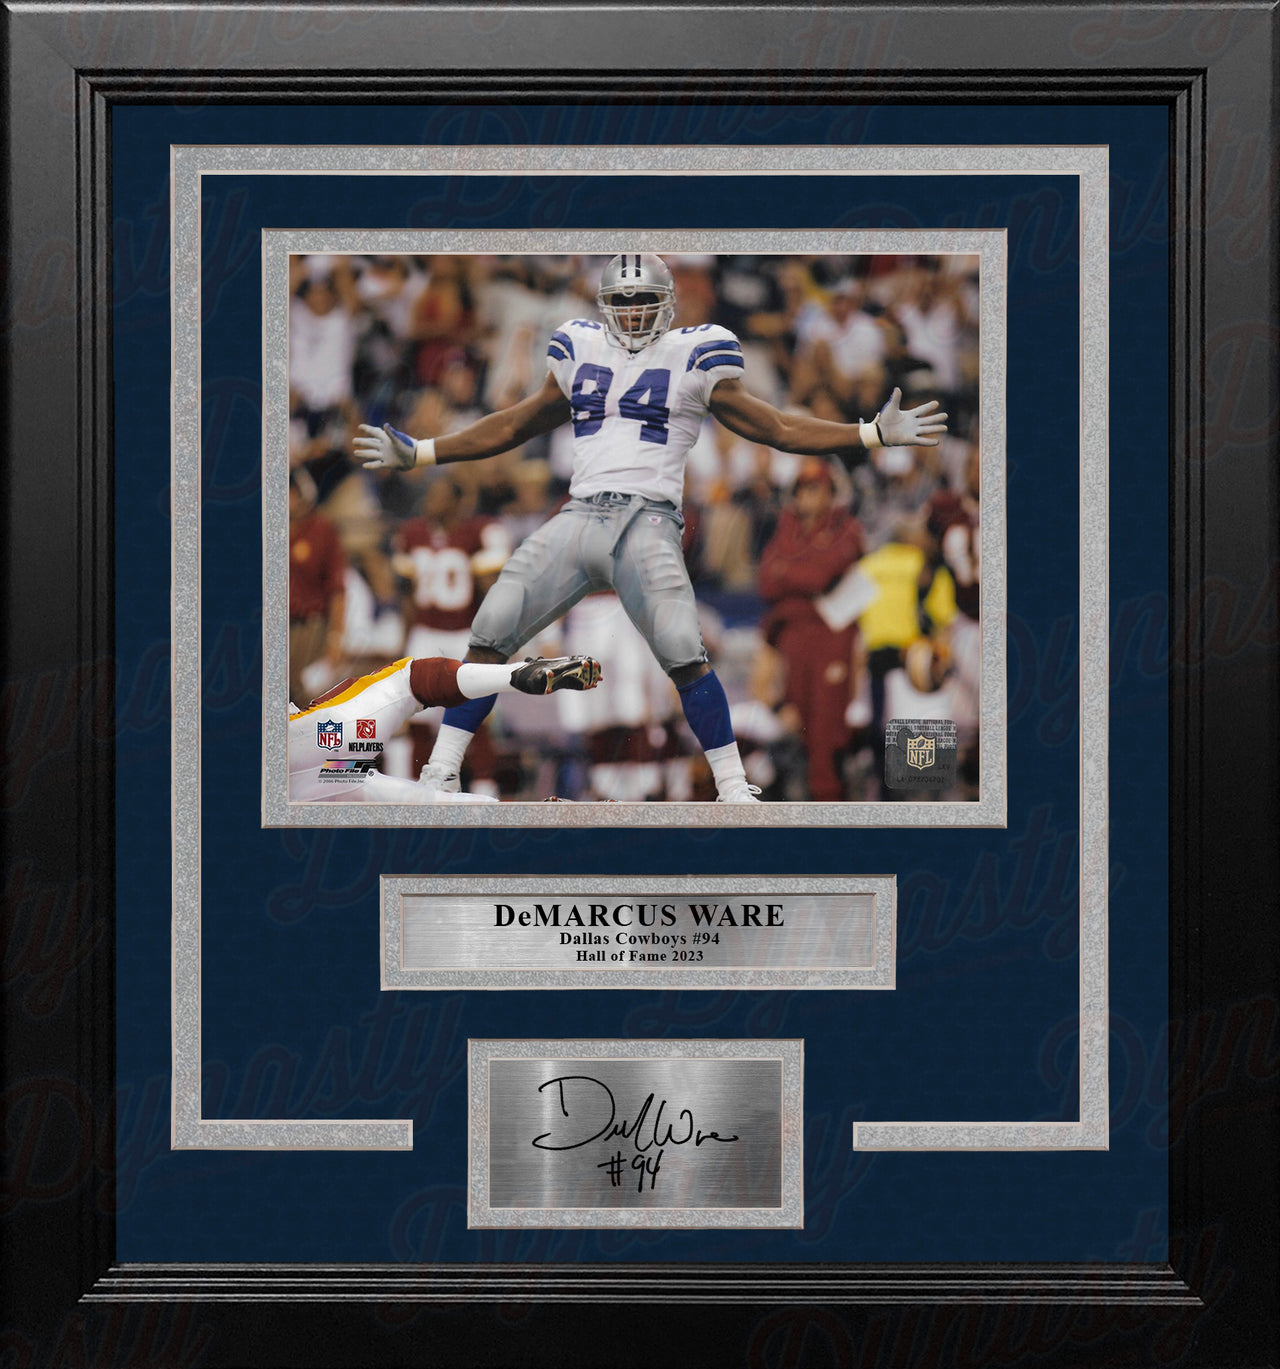 DeMarcus Ware Celebration Dallas Cowboys 8" x 10" Framed Football Photo with Engraved Autograph